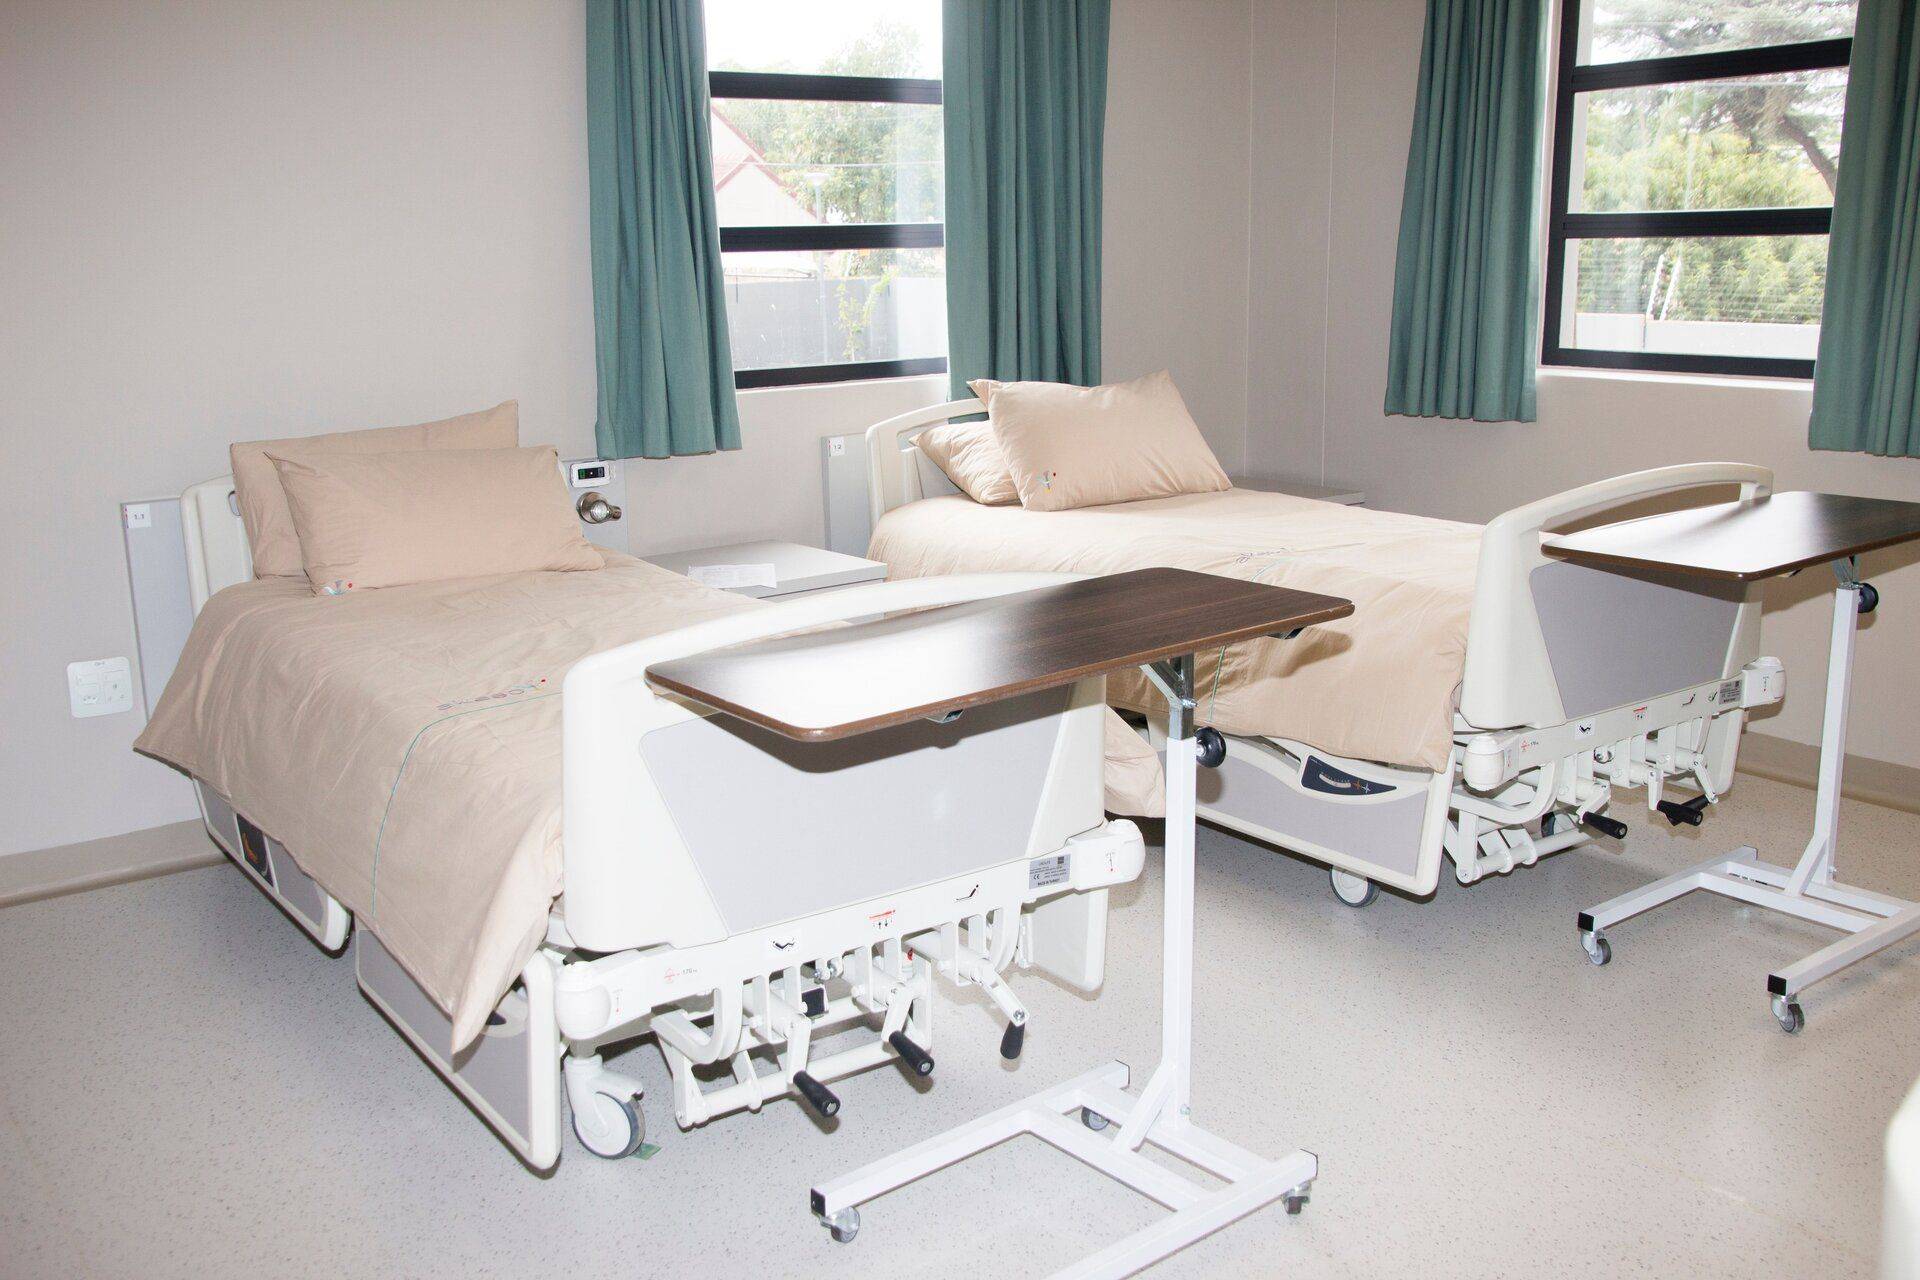 semi-private hospital room with two beds